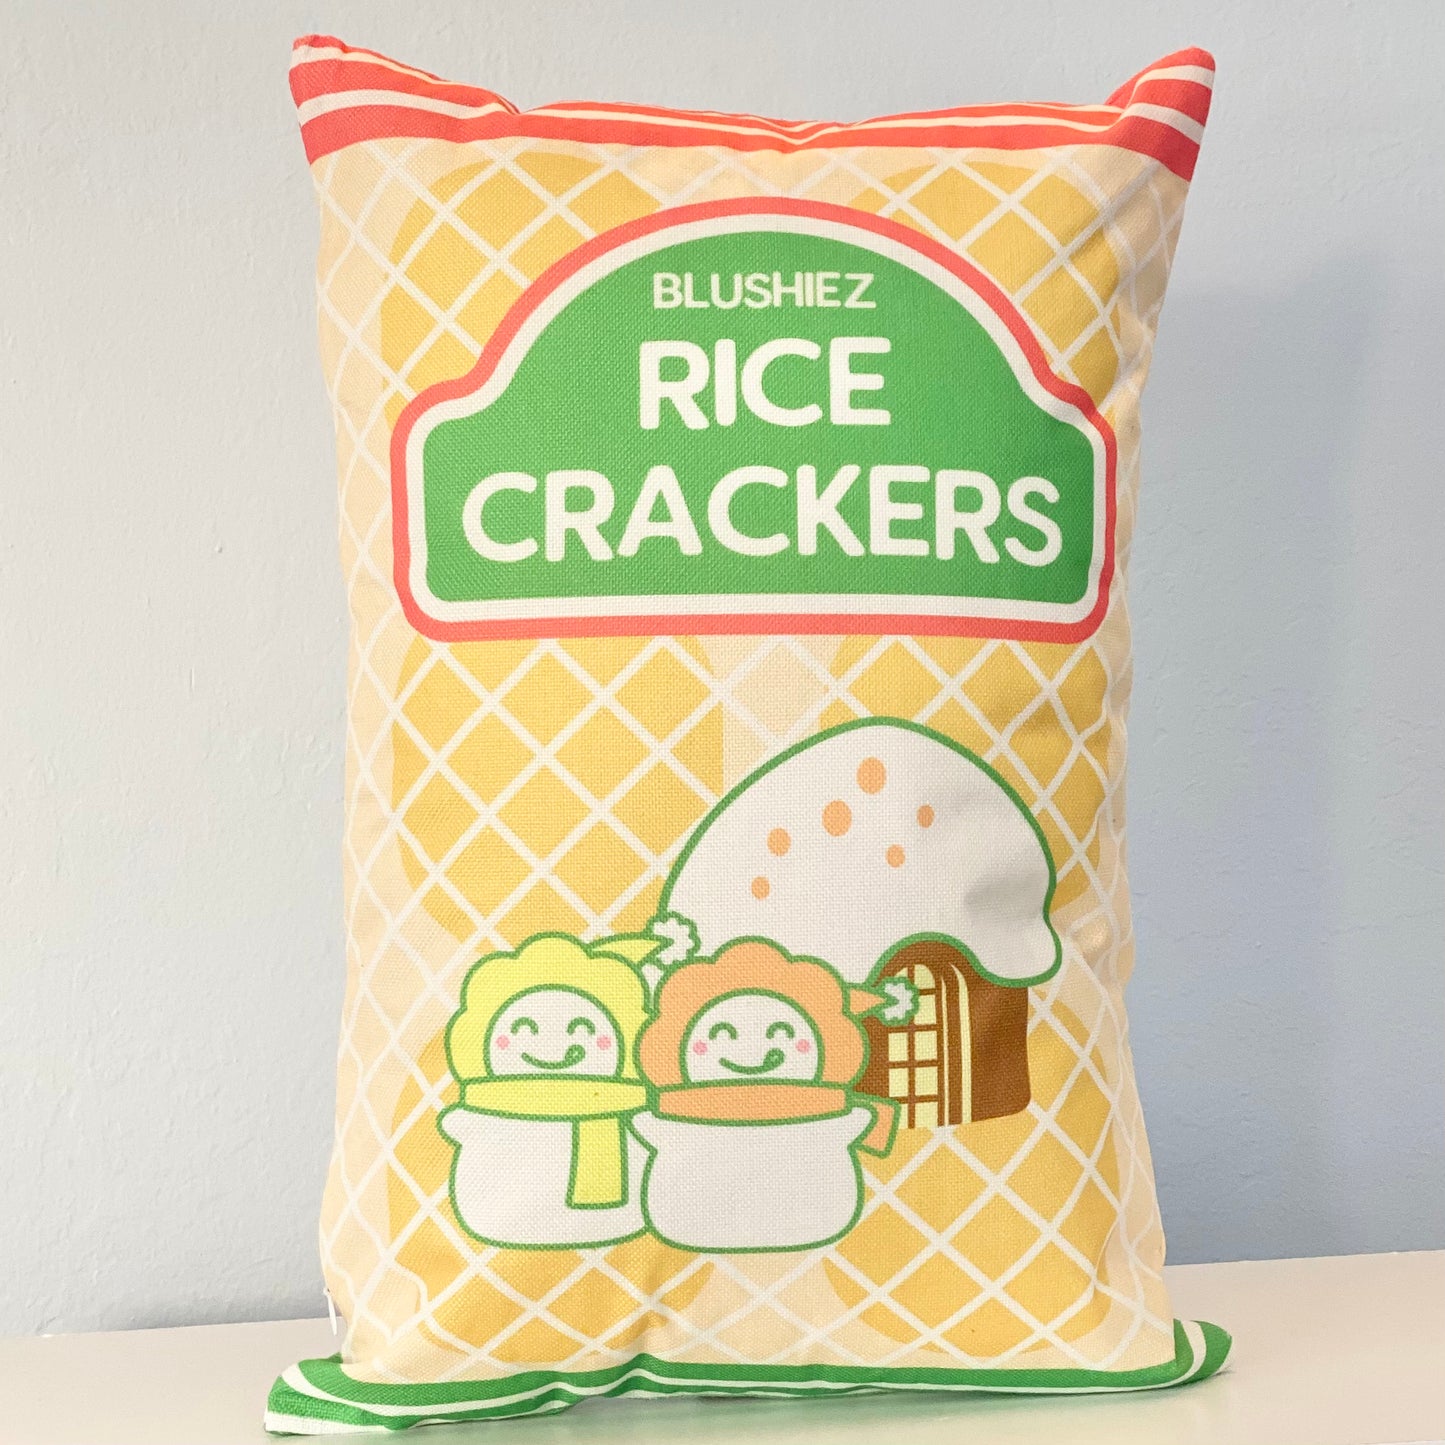 Pillow with a festive snack-inspired design. The pillow features a light orange background resembling rice crackers, with orange stripes at the top and green stripes at the bottom. The design includes a charming scene of two snowmen in front of a house with a snowy roof, evoking a festive and wintery atmosphere.